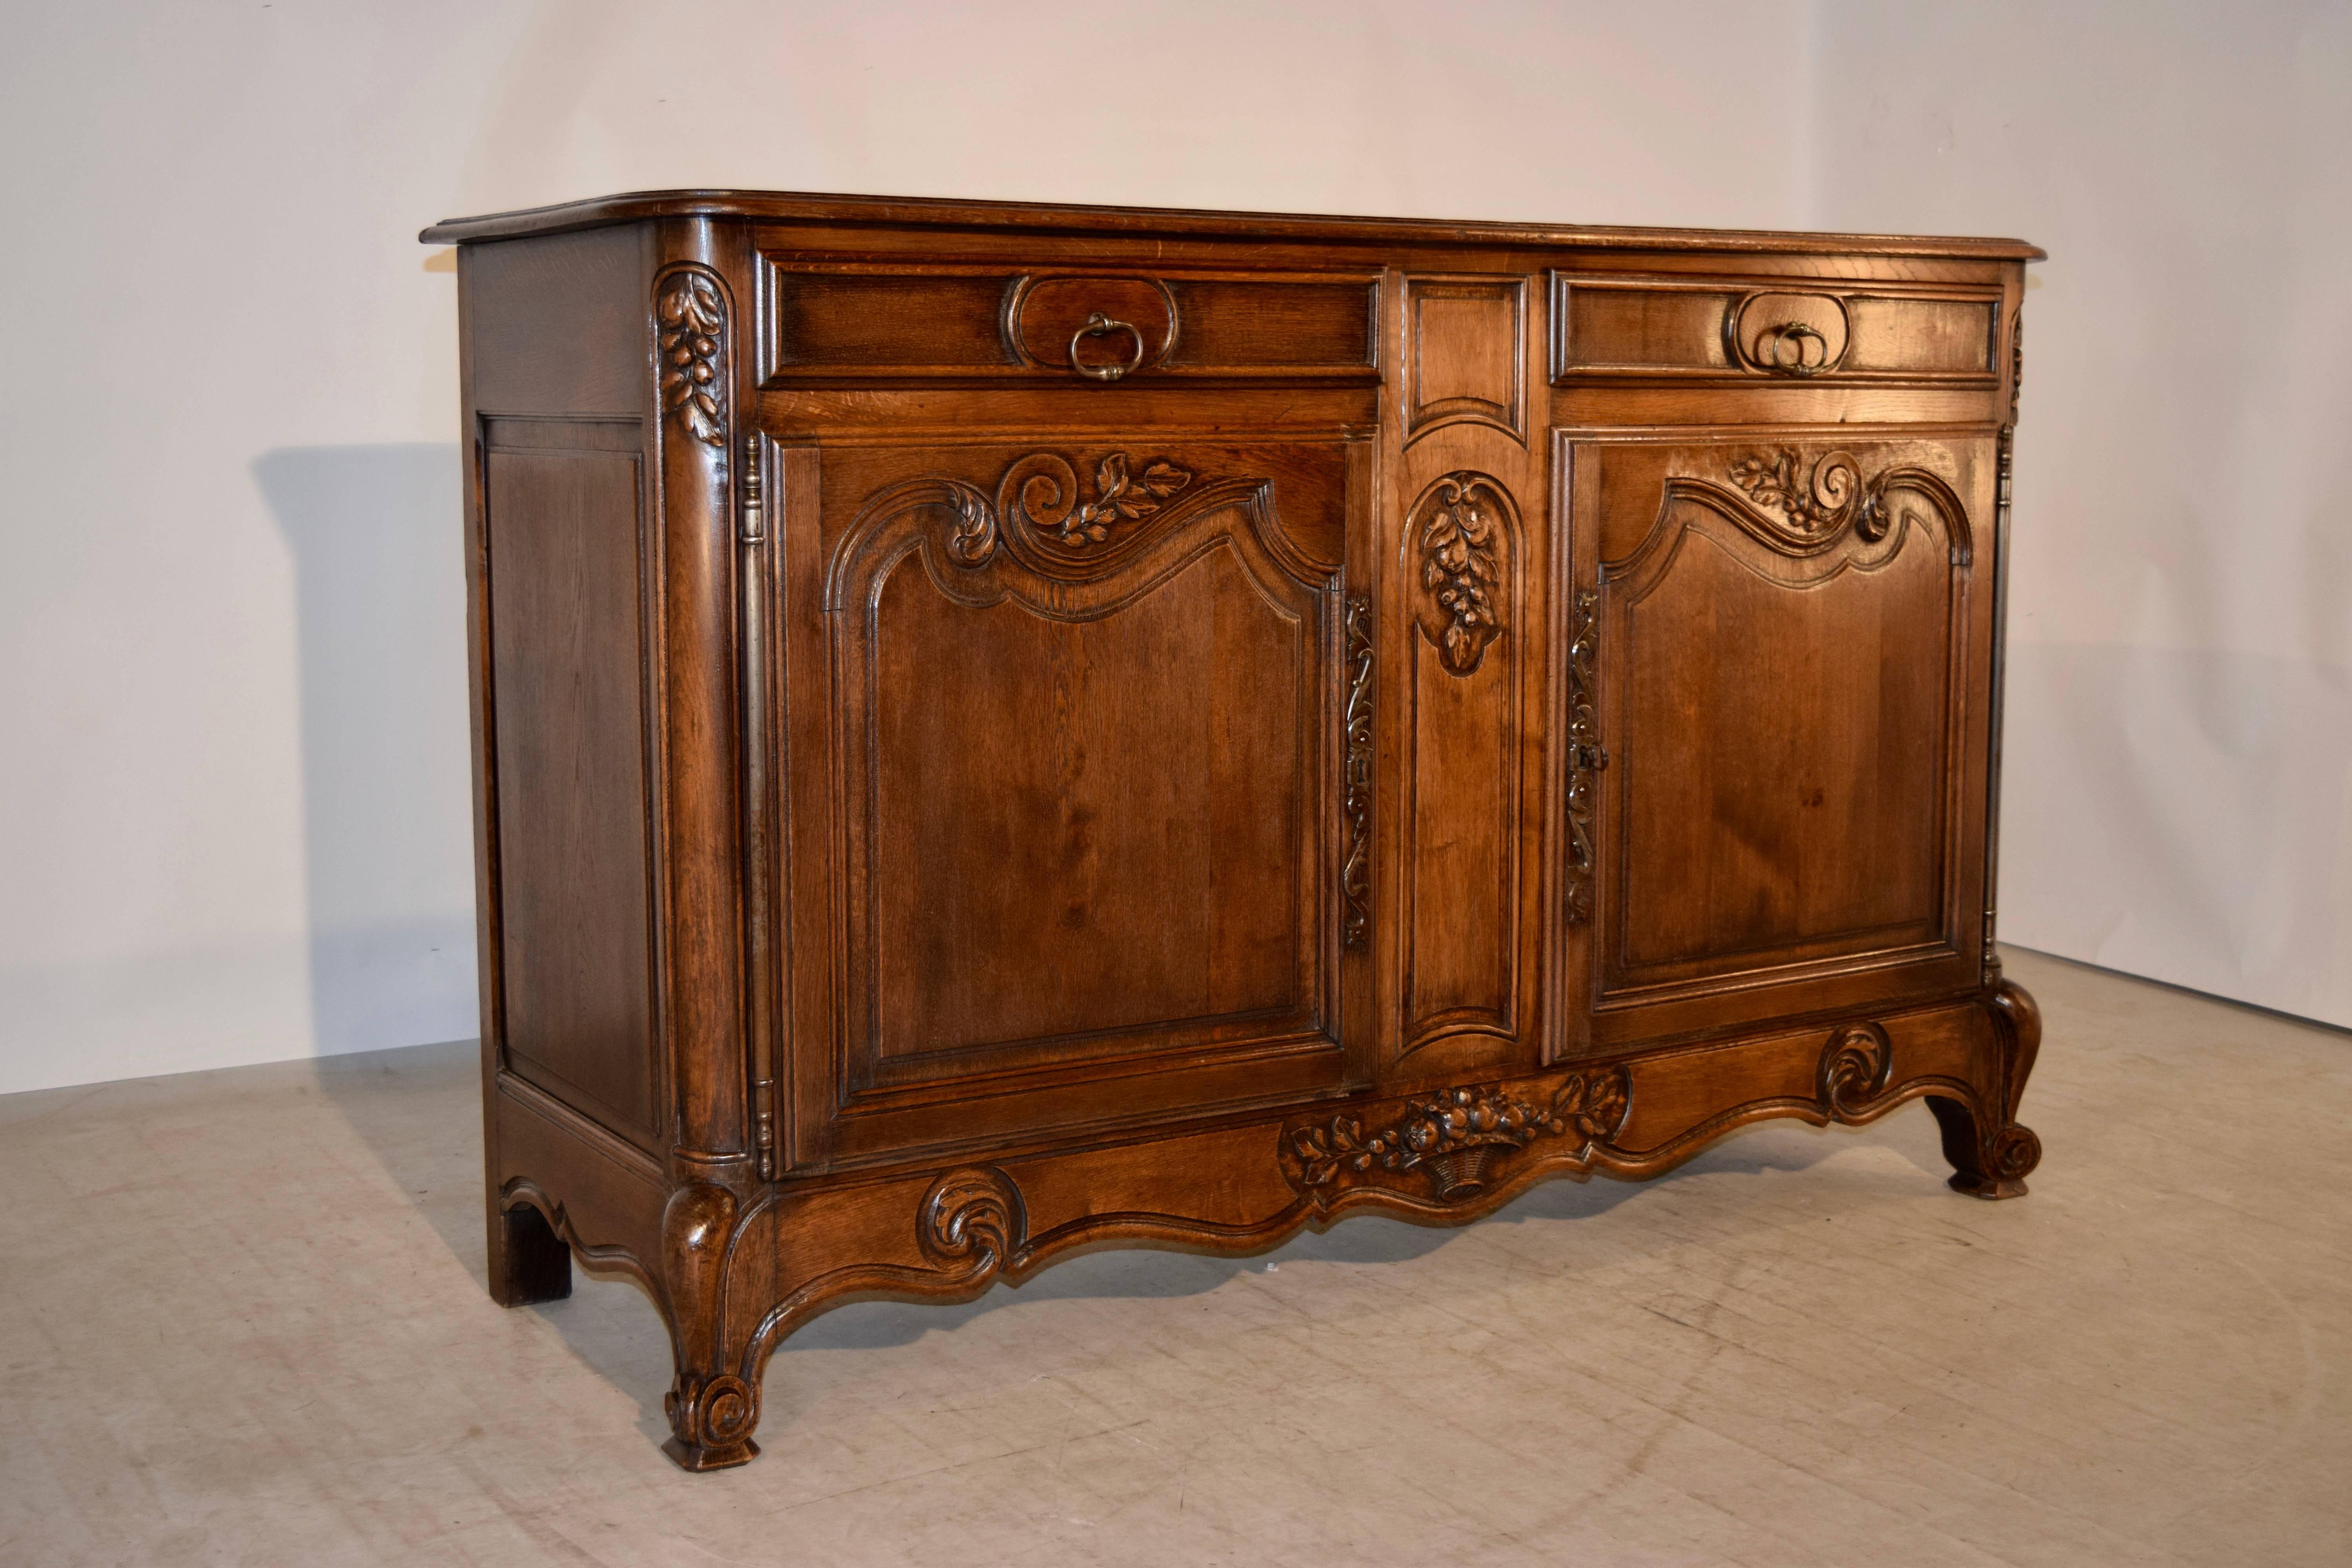 19th century oak enfilade from France. The top is bevelled around the edge and follows down to sides with raised panels and two drawers over two doors in the front, which open to reveal storage. The drawers are raised panelled and have nice molded